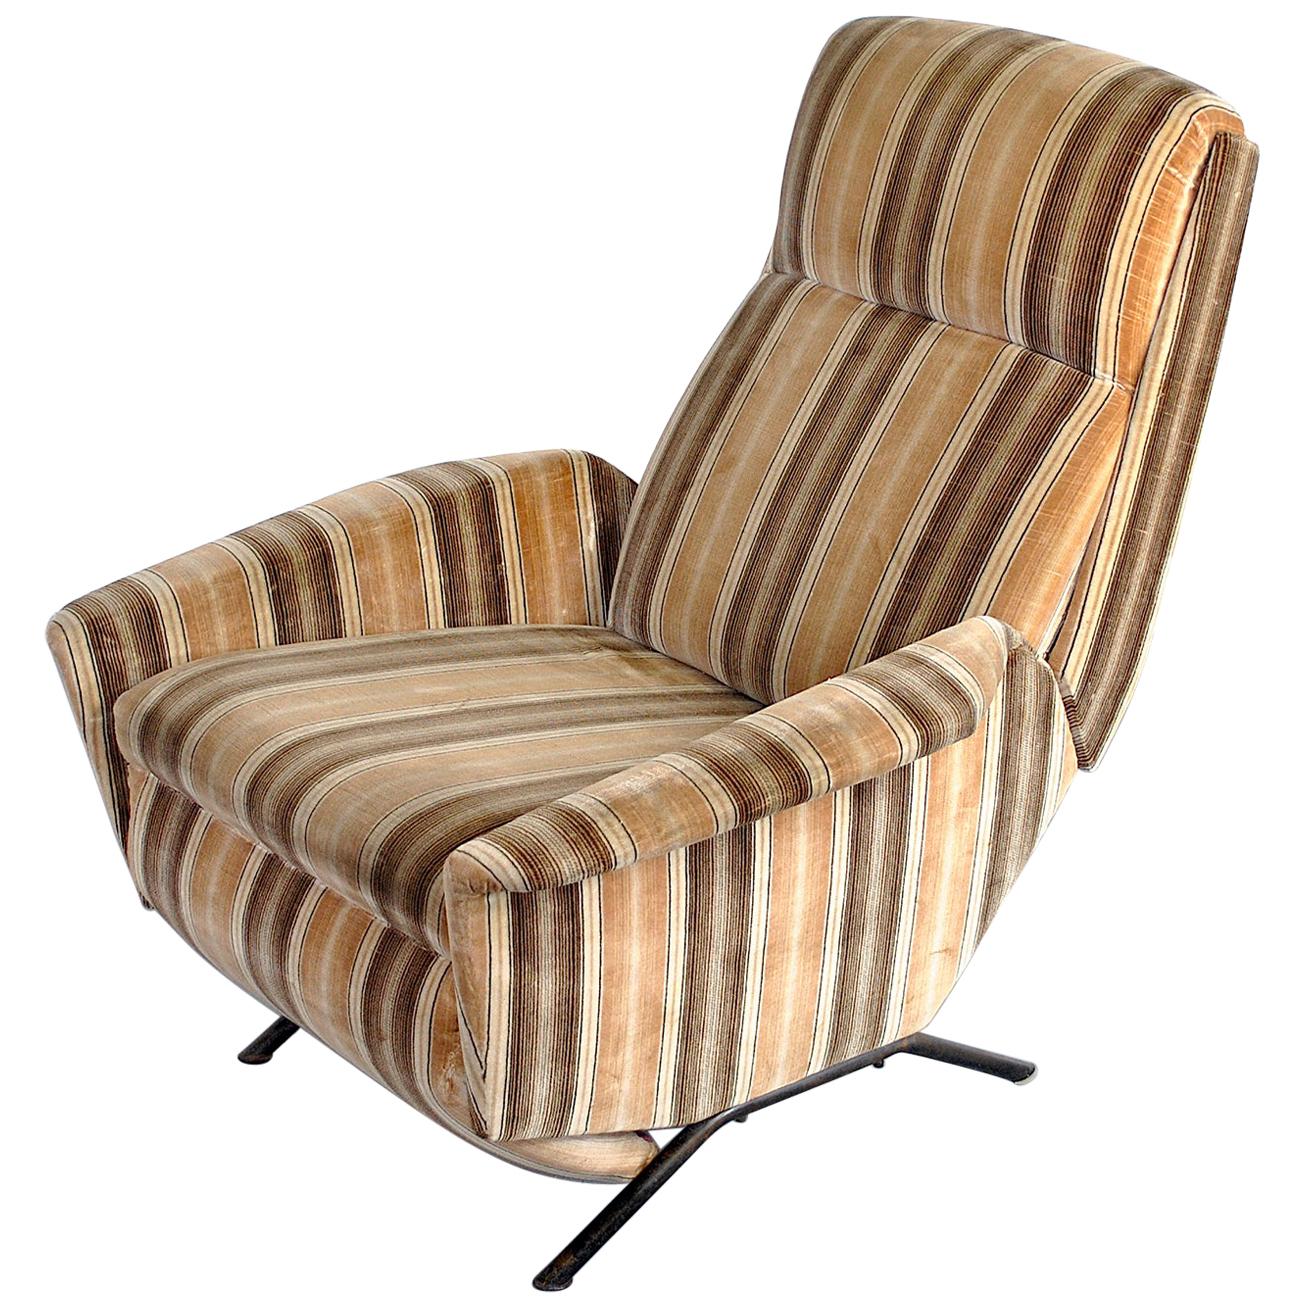 Gio Ponti in the Manner Armchair